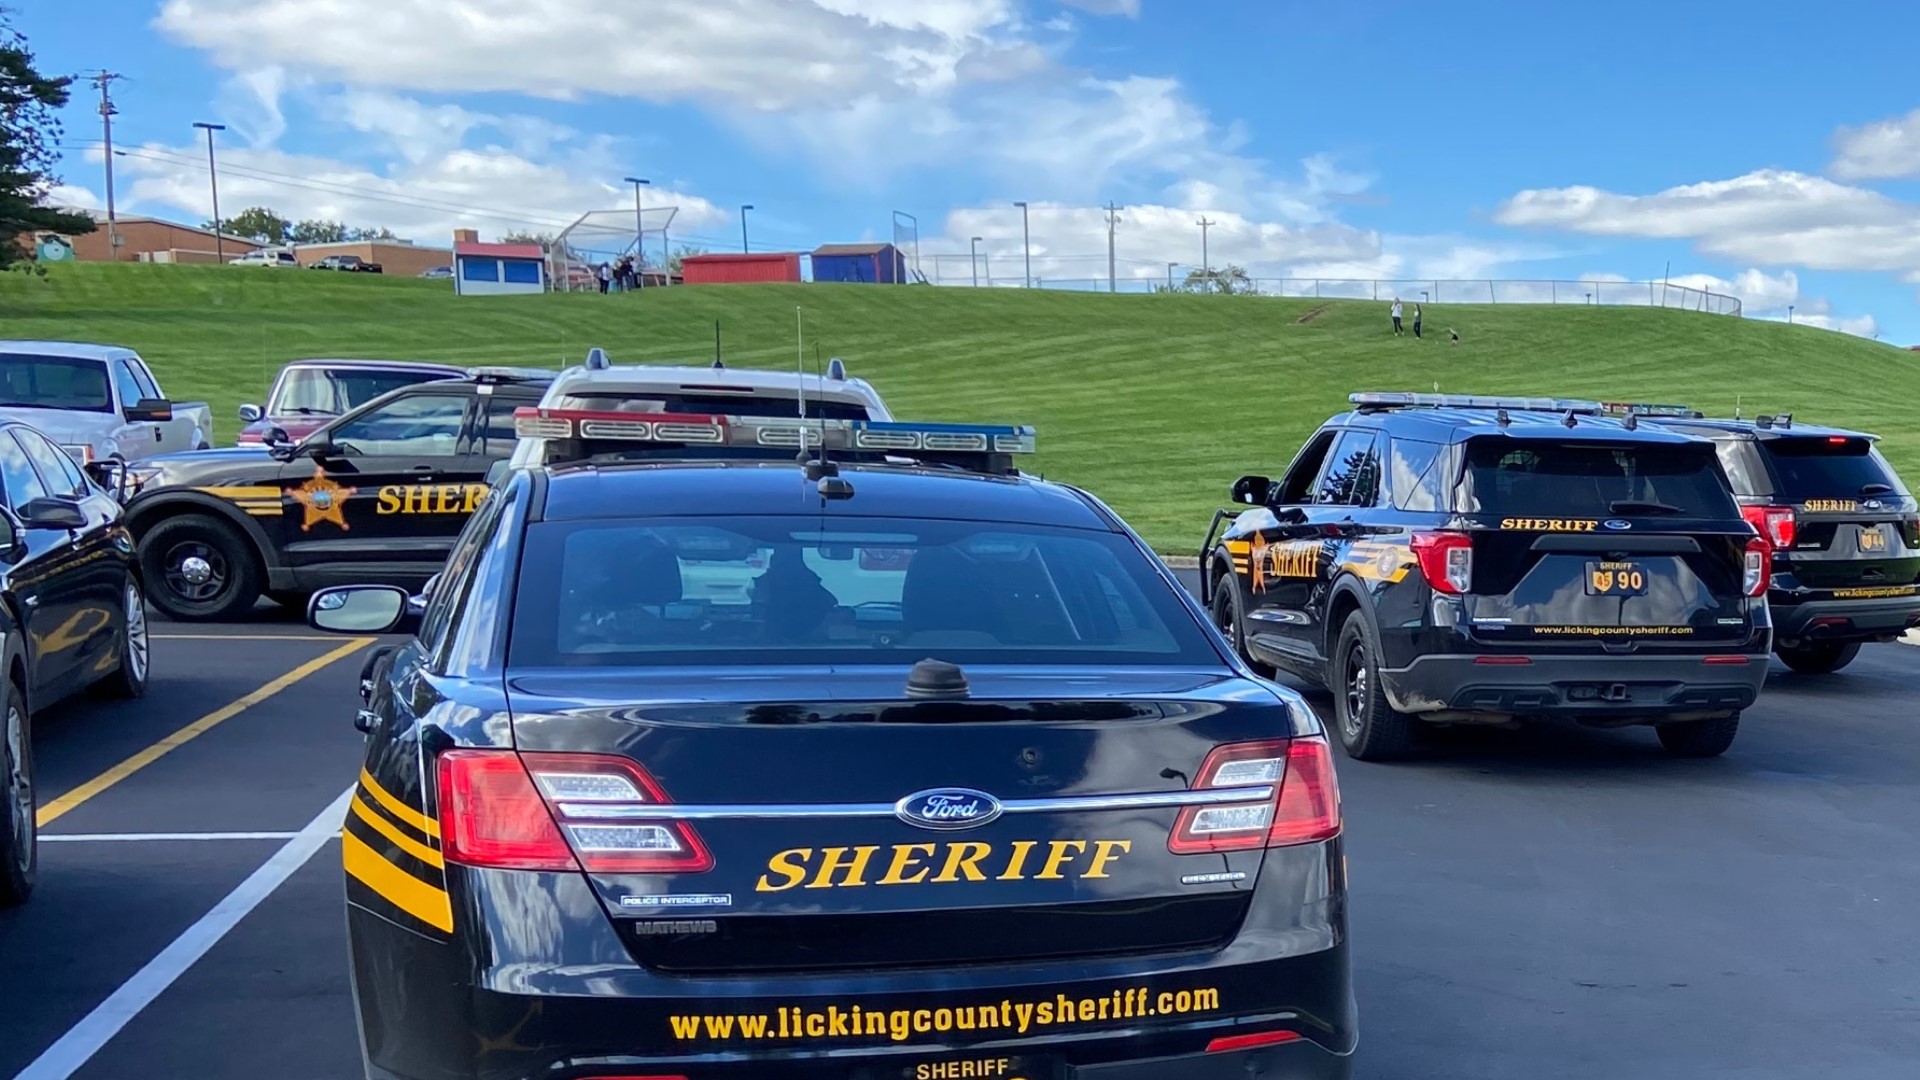 A swatting incident led to a heavy police presence at Licking Valley High School Friday morning, according to the sheriff’s office.